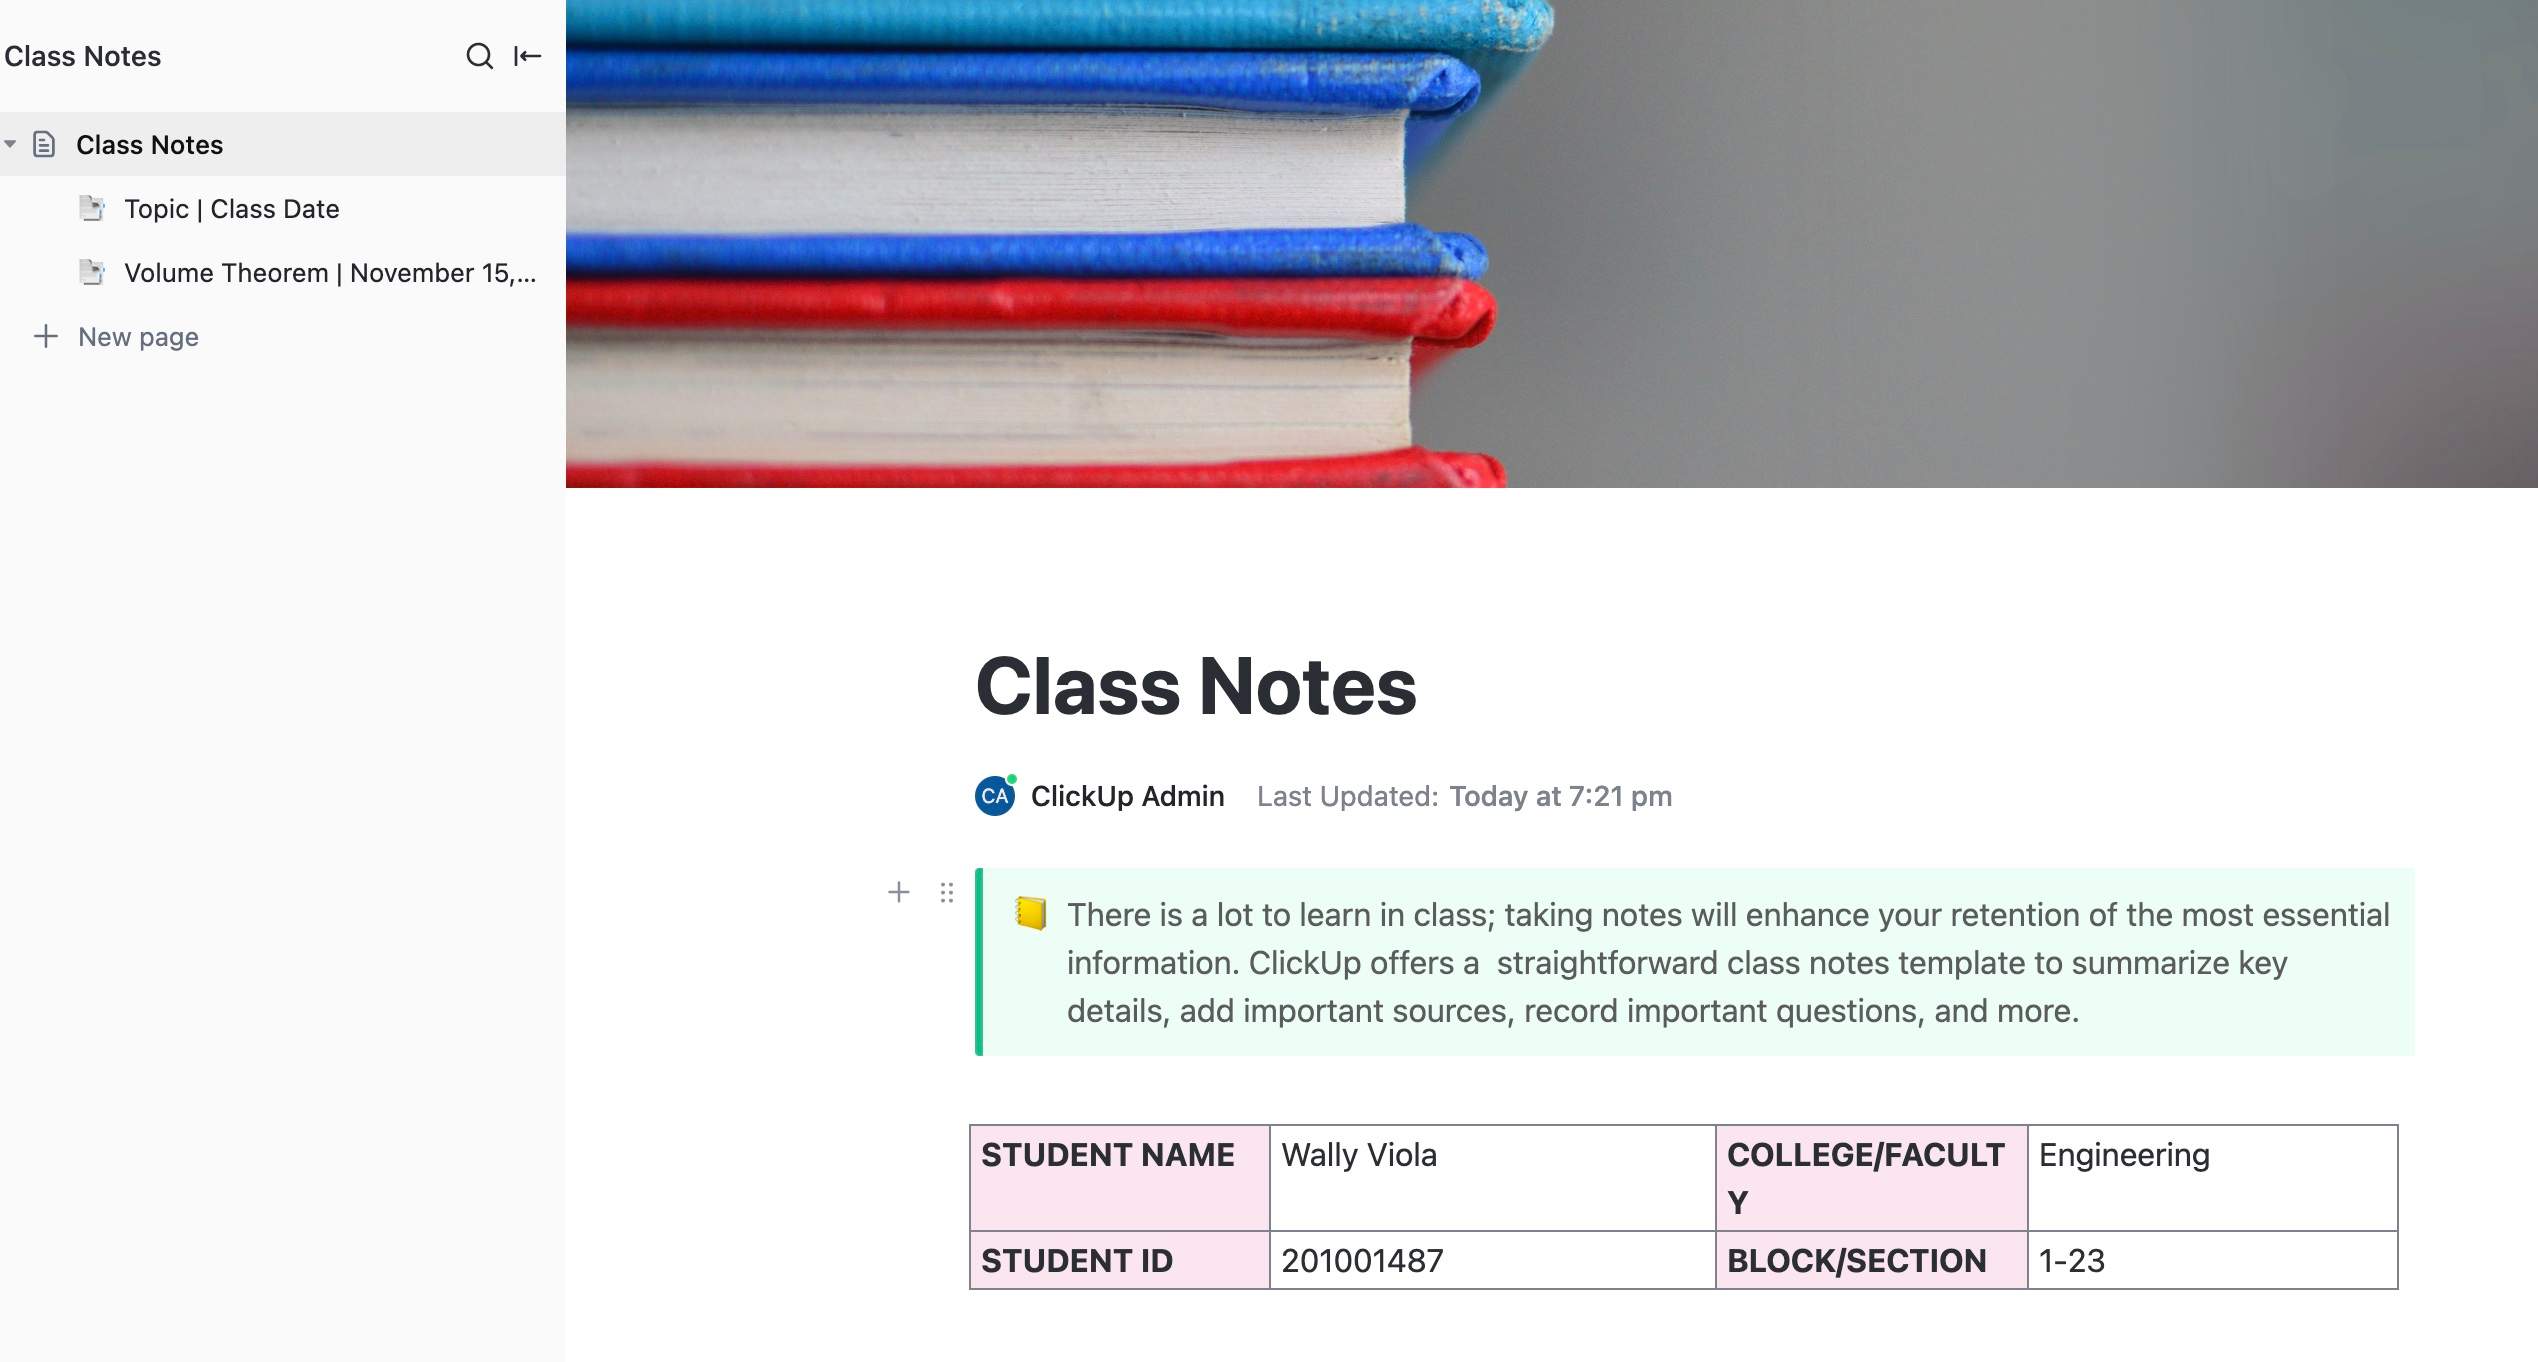 There is a lot to learn in class; taking notes will enhance your retention of the most essential information. ClickUp offers a  straightforward class notes template to summarize key details, add important sources, record important questions, and more.